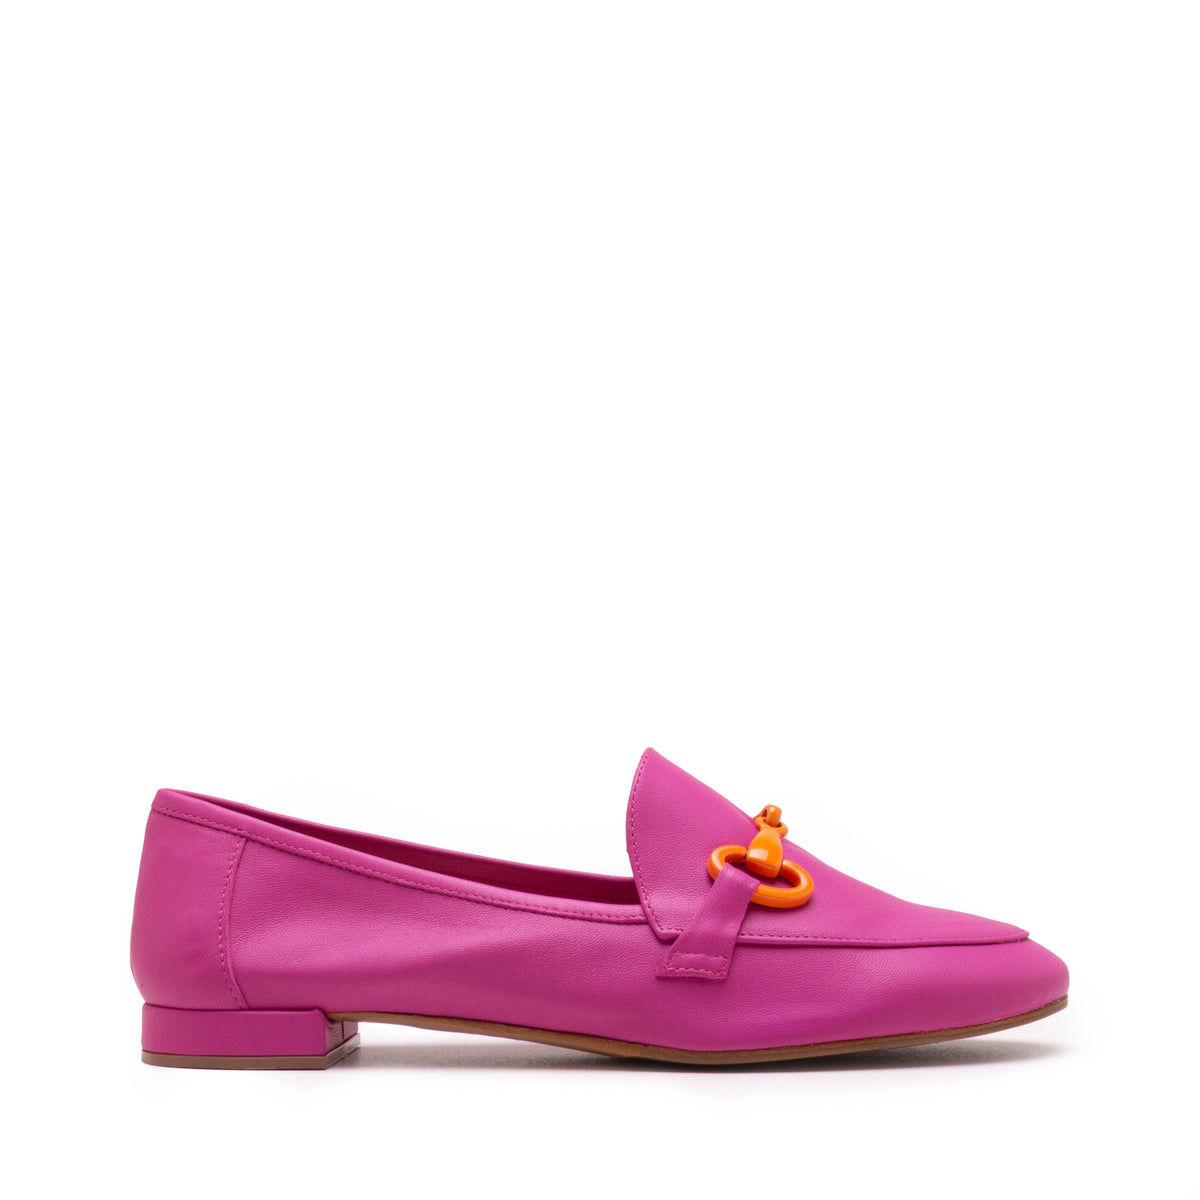 GALA' LOAFERS